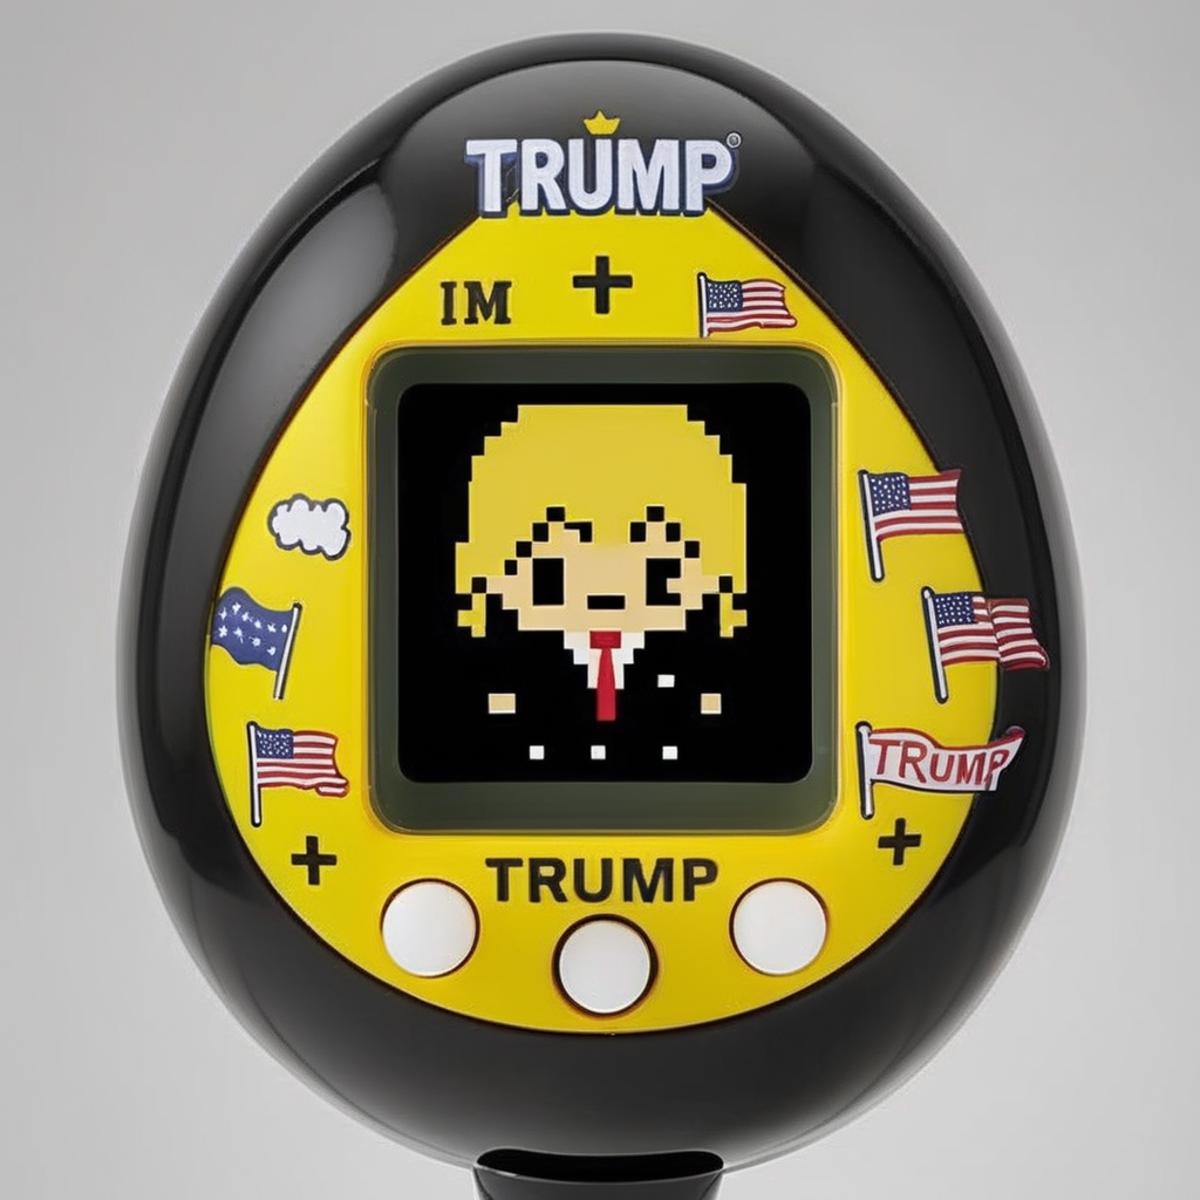 An egg-shaped, yellow virtual pet device is featured with a central screen displaying a  Trump in black. The screen is enc...